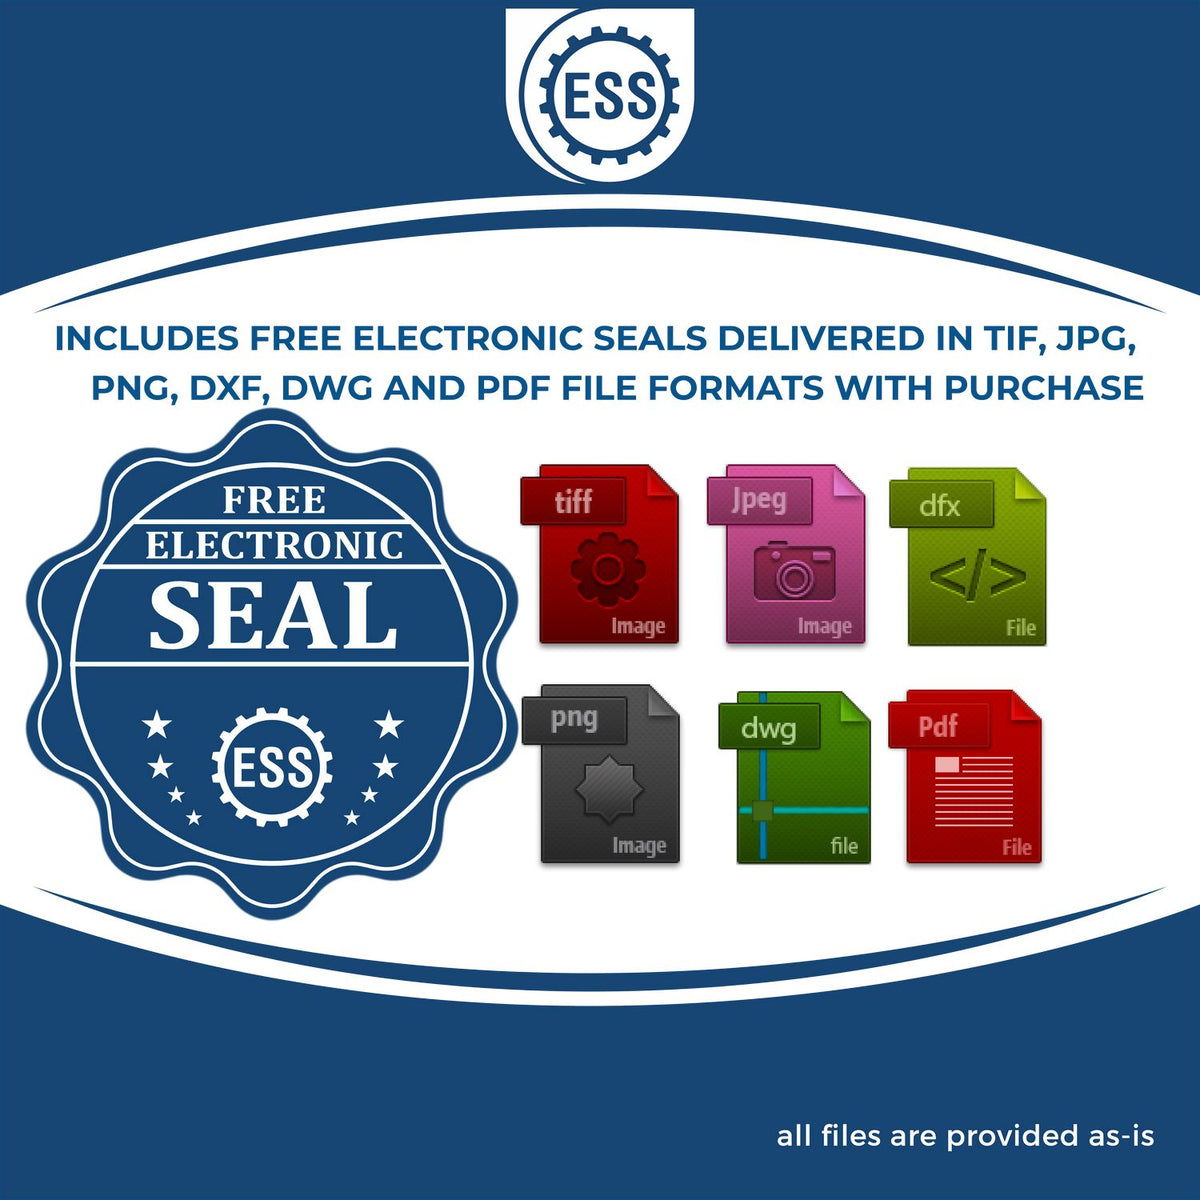 An infographic for the free electronic seal for the Heavy Duty Cast Iron Kansas Architect Embosser illustrating the different file type icons such as DXF, DWG, TIF, JPG and PNG.